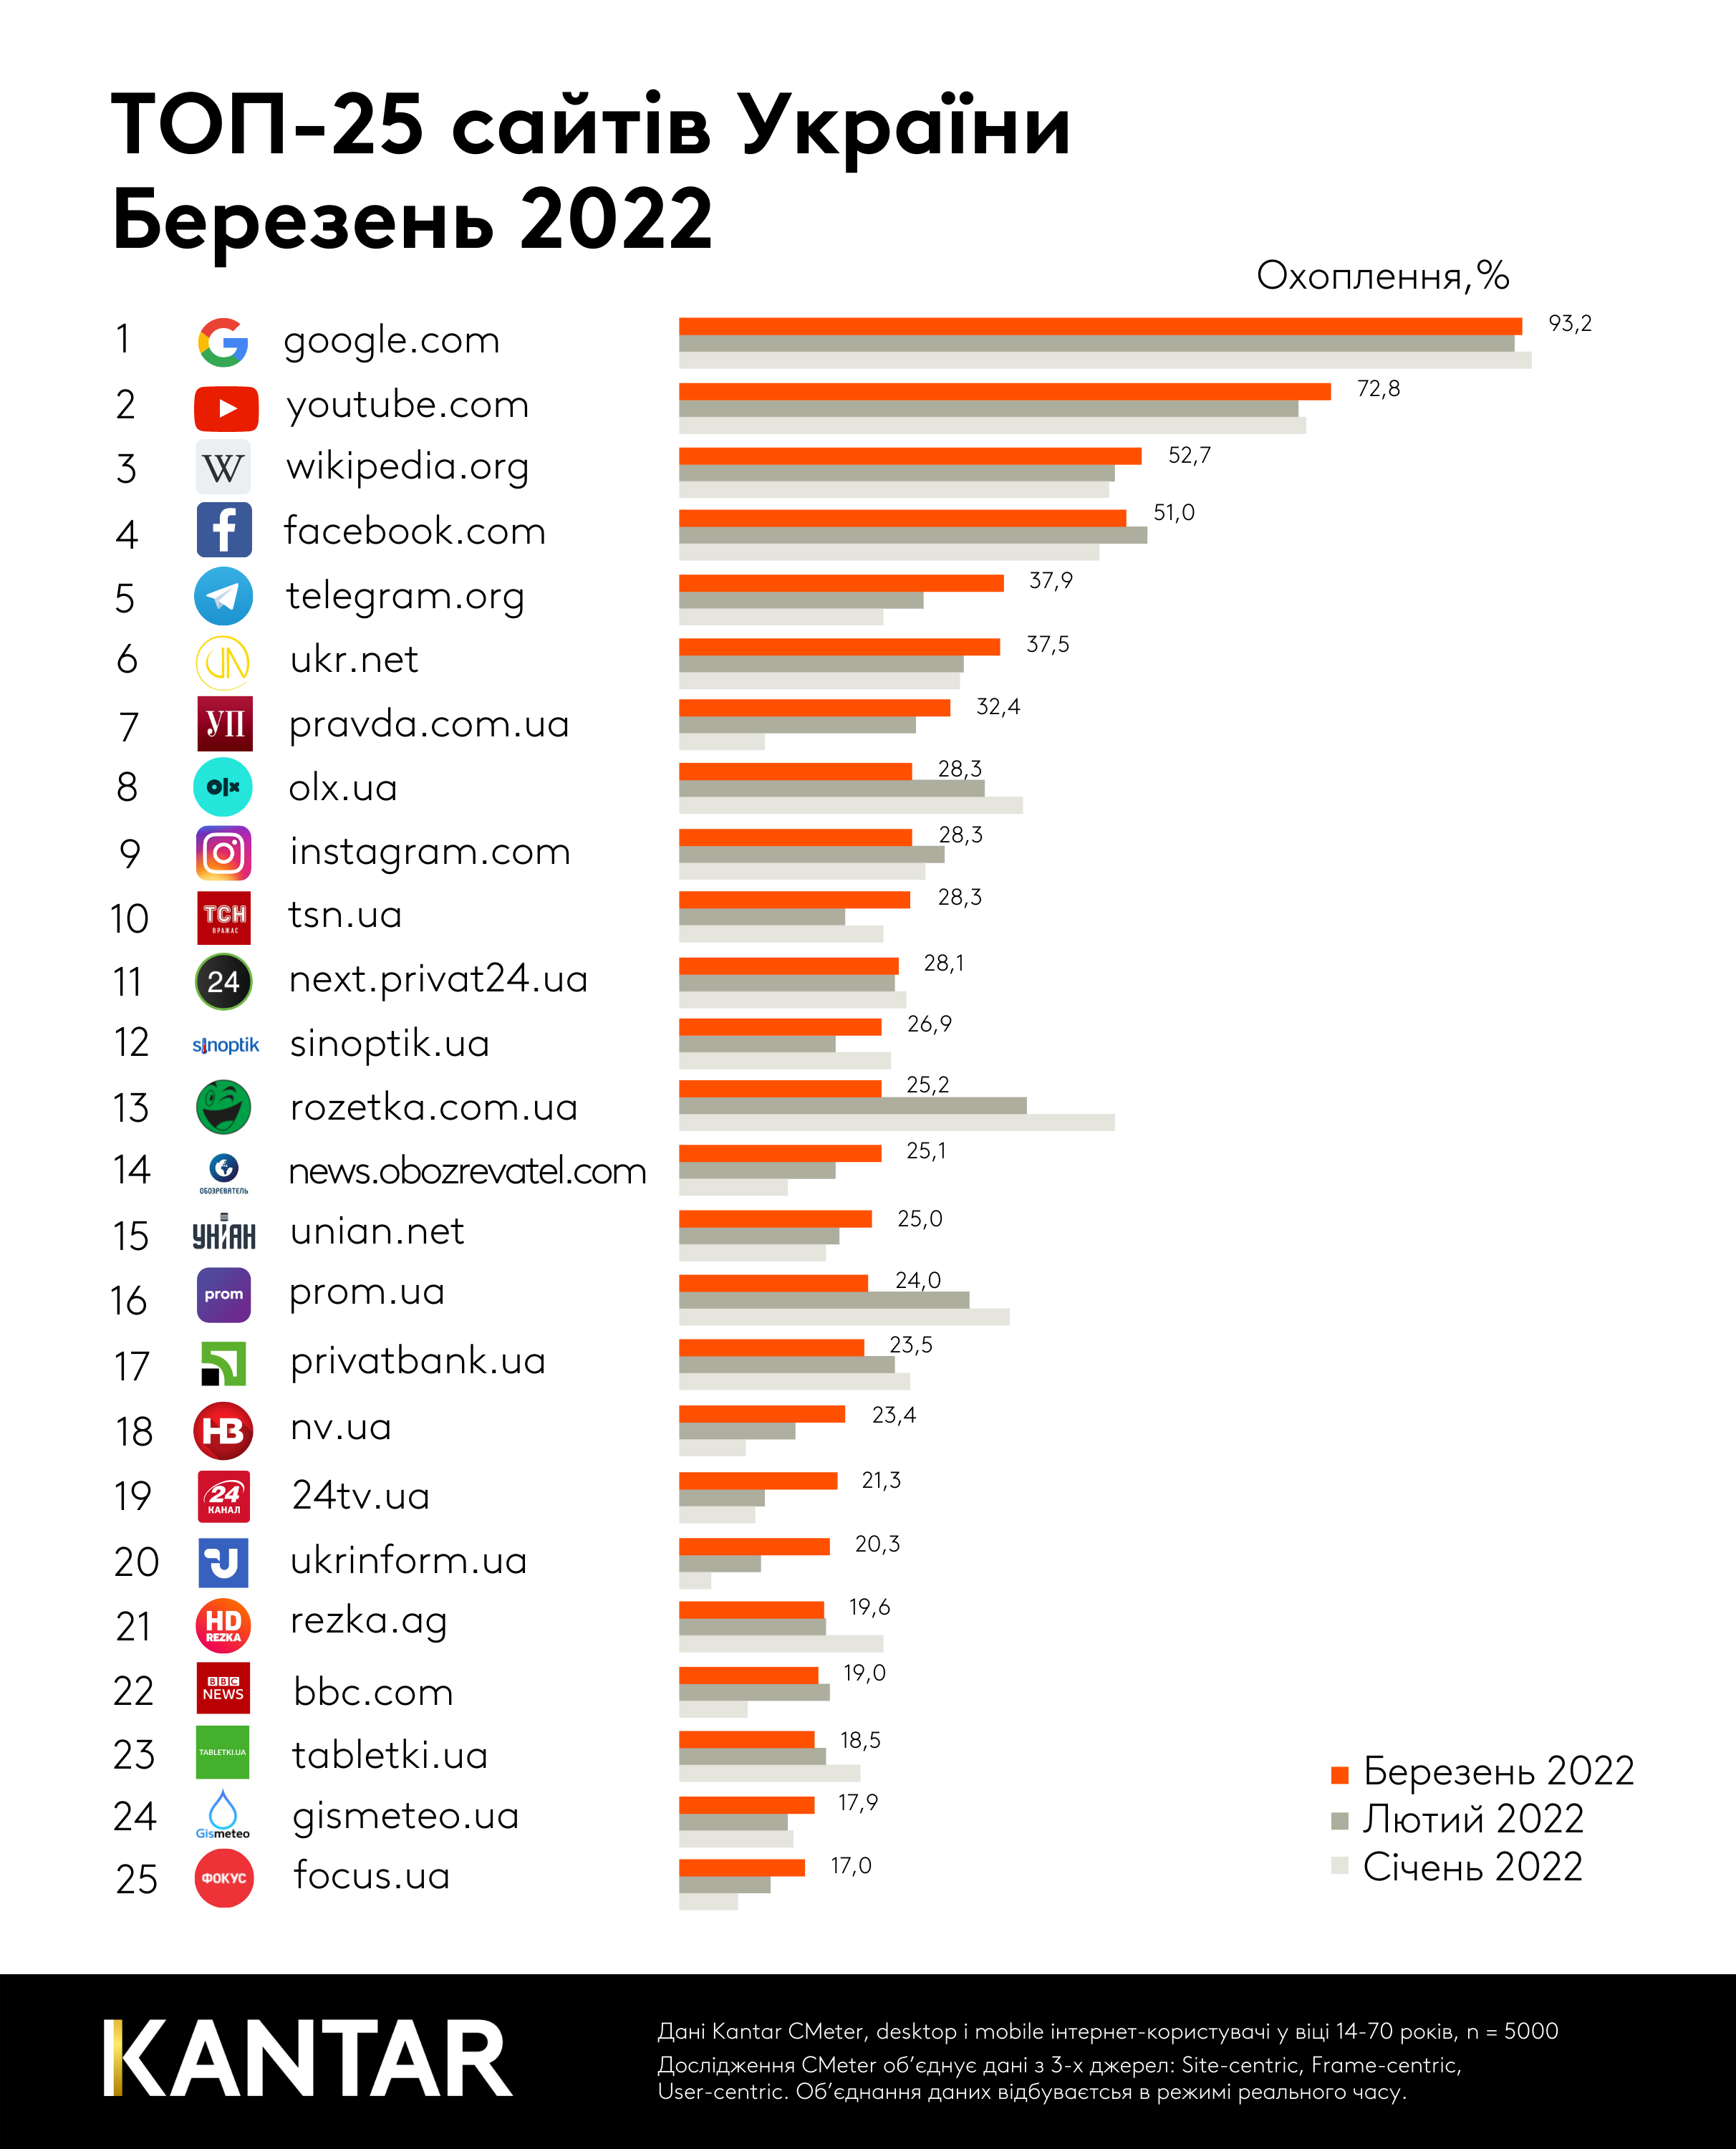 Ukrainian Internet after the war beginning: Telegram entered the top 5 sites, Rozetka and Prom dropped out of the top ten